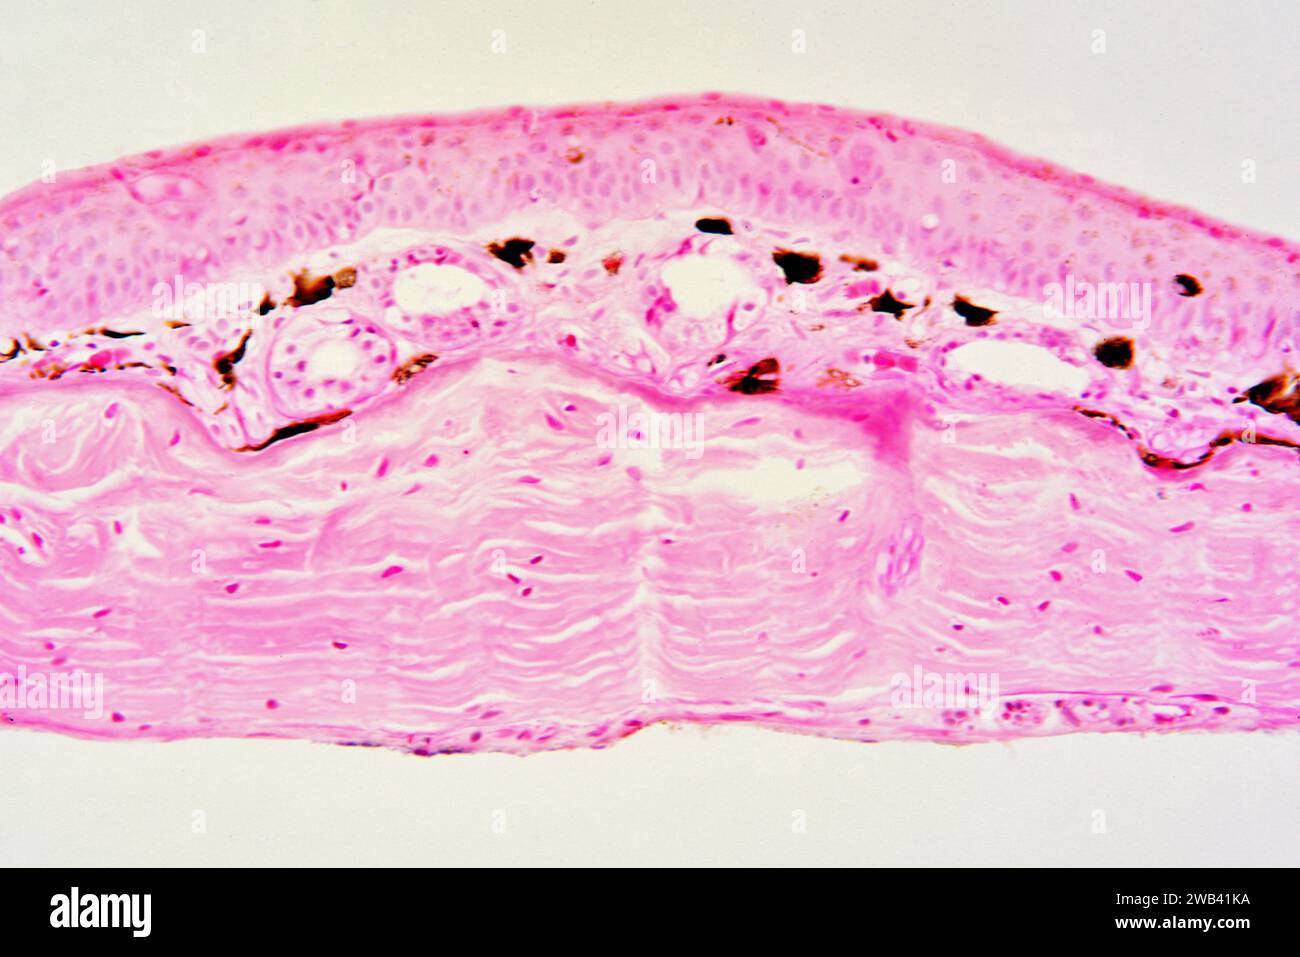 Frog skin showing epidermis, pigmentary layer with melanocytes (brown), blood vessels and dermis. Photomicrograph X150 at 10 cm wide. Stock Photo